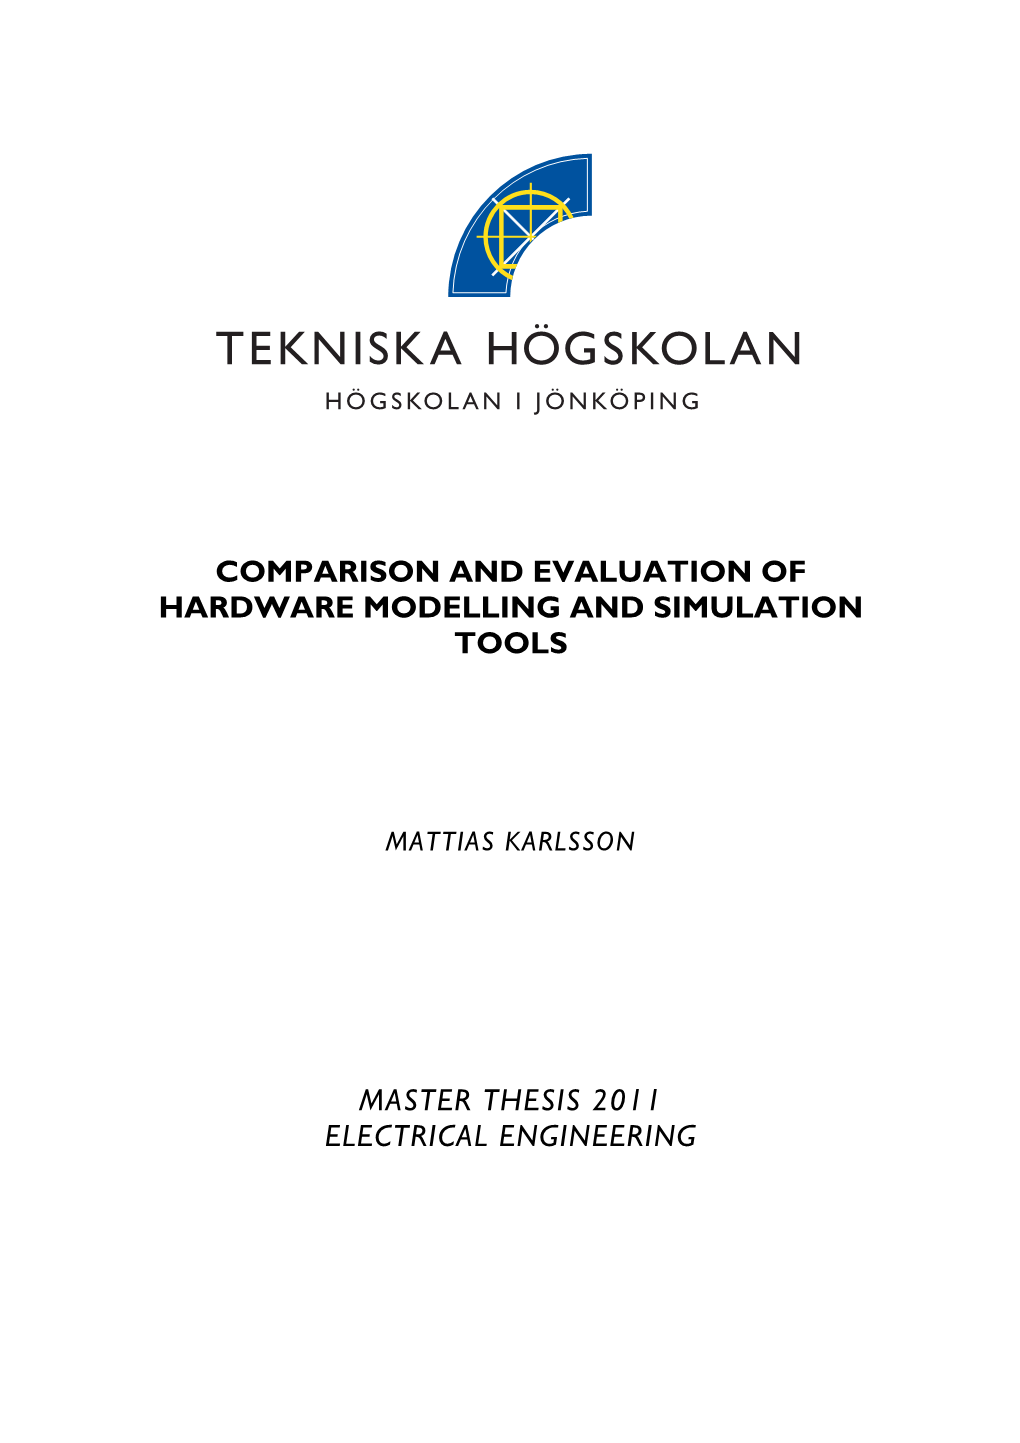 Comparison and Evaluation of Hardware Modelling and Simulation Tools